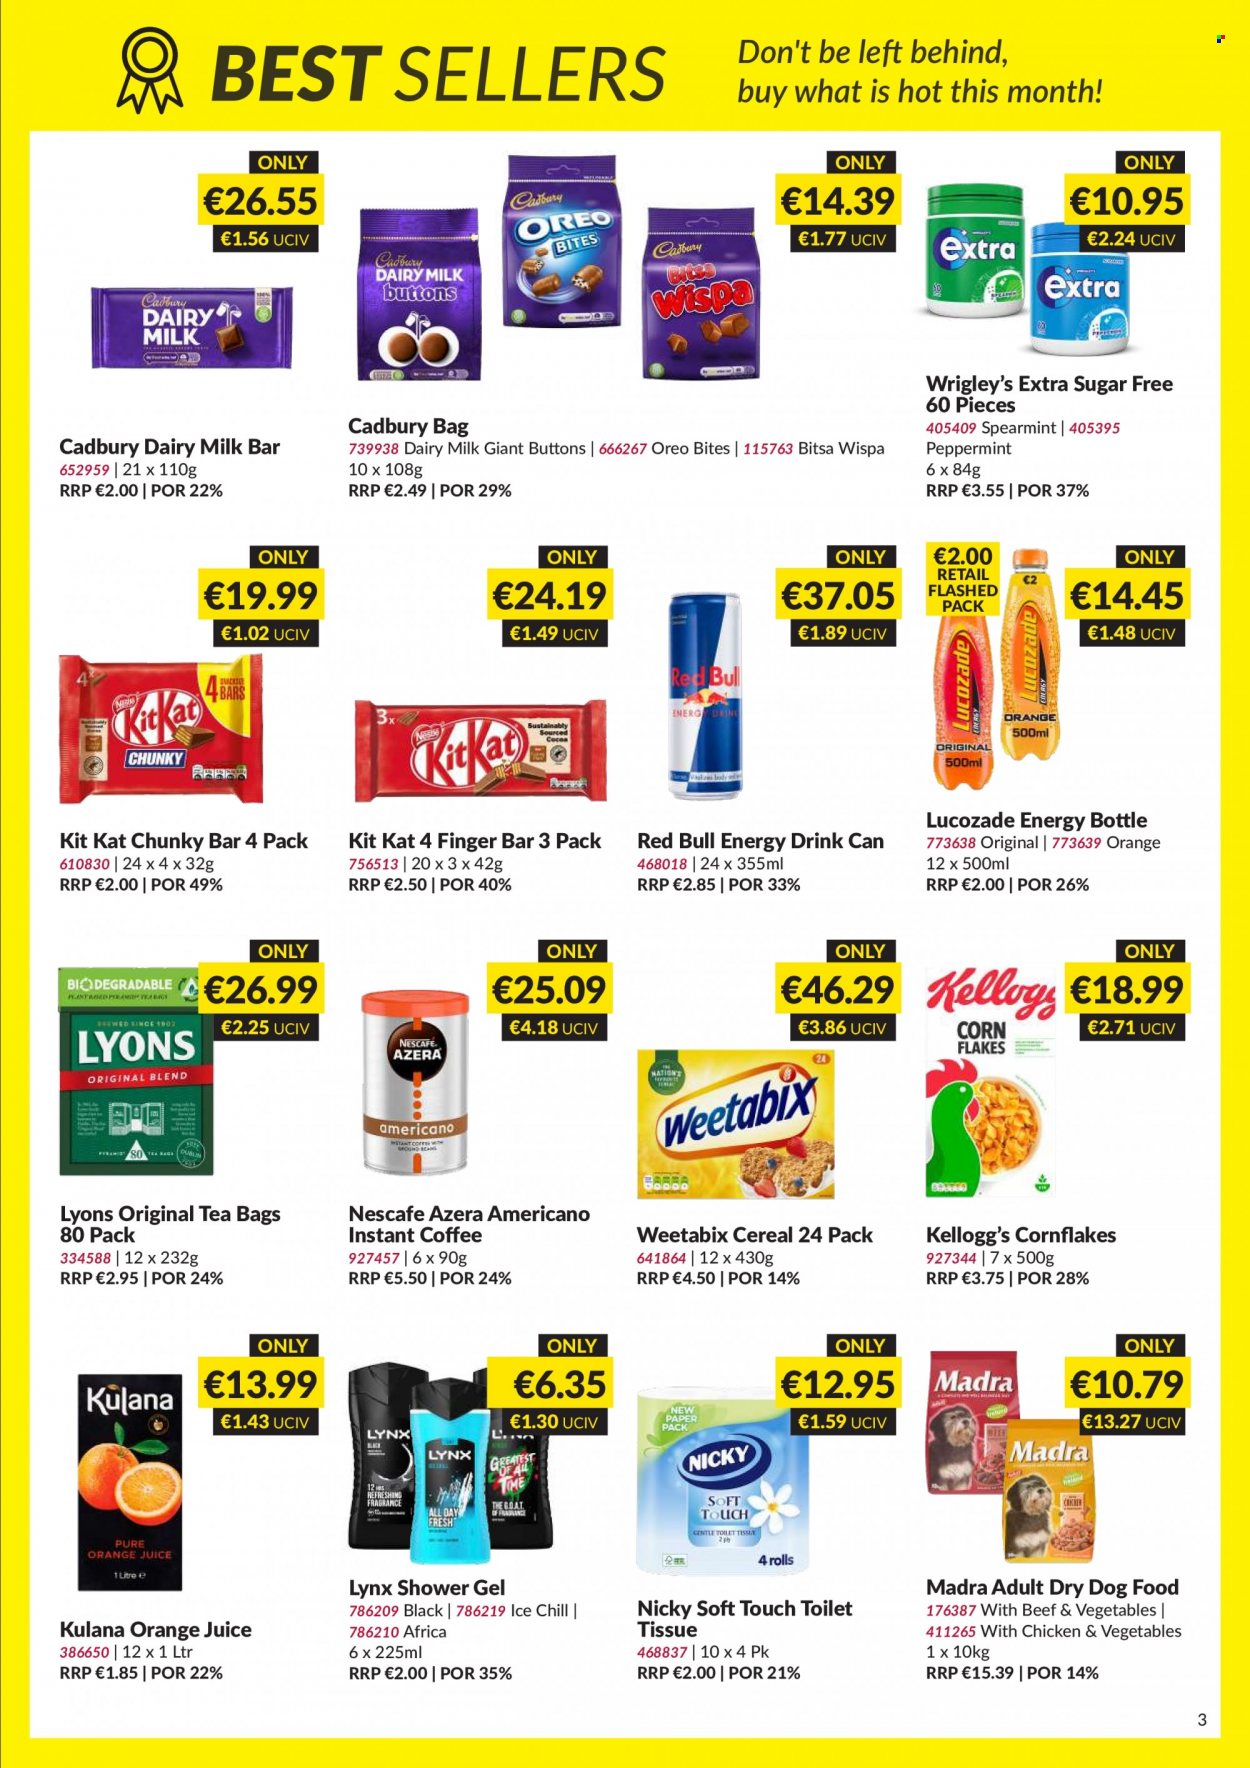 thumbnail - MUSGRAVE Market Place offer  - 07.05.2023 - 03.06.2023 - Sales products - Oreo, KitKat, Kellogg's, Cadbury, Milkybar, Dairy Milk, Wrigley's, cereals, corn flakes, Weetabix, orange juice, juice, energy drink, Red Bull, Lucozade, tea bags, Lyons, coffee, instant coffee, Nescafé, toilet paper, shower gel, animal food, dry dog food, dog food. Page 3.